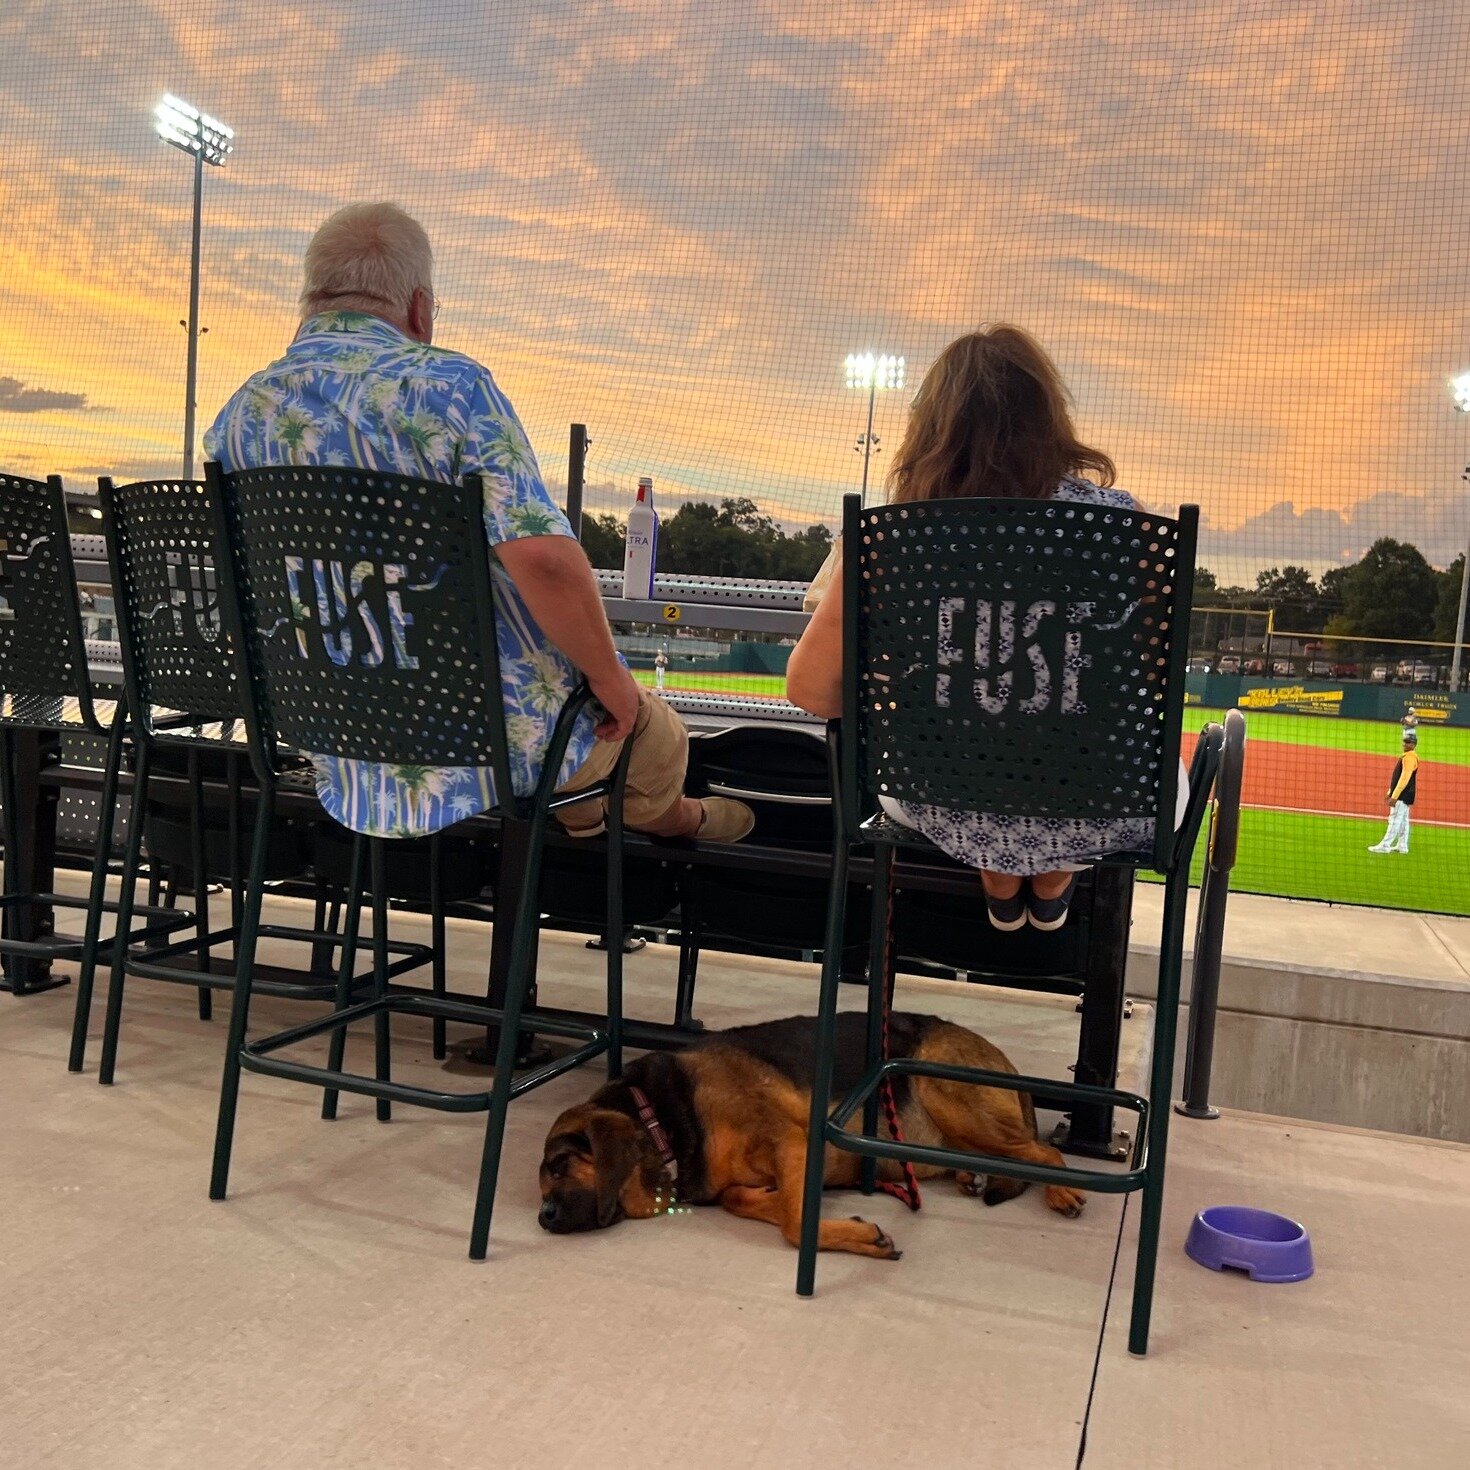 #ThrowbackThursday to baseball with a sunset sky backdrop and the dog-days of summer☀️

#tbt #barkinthepark #sunset #Gastonia